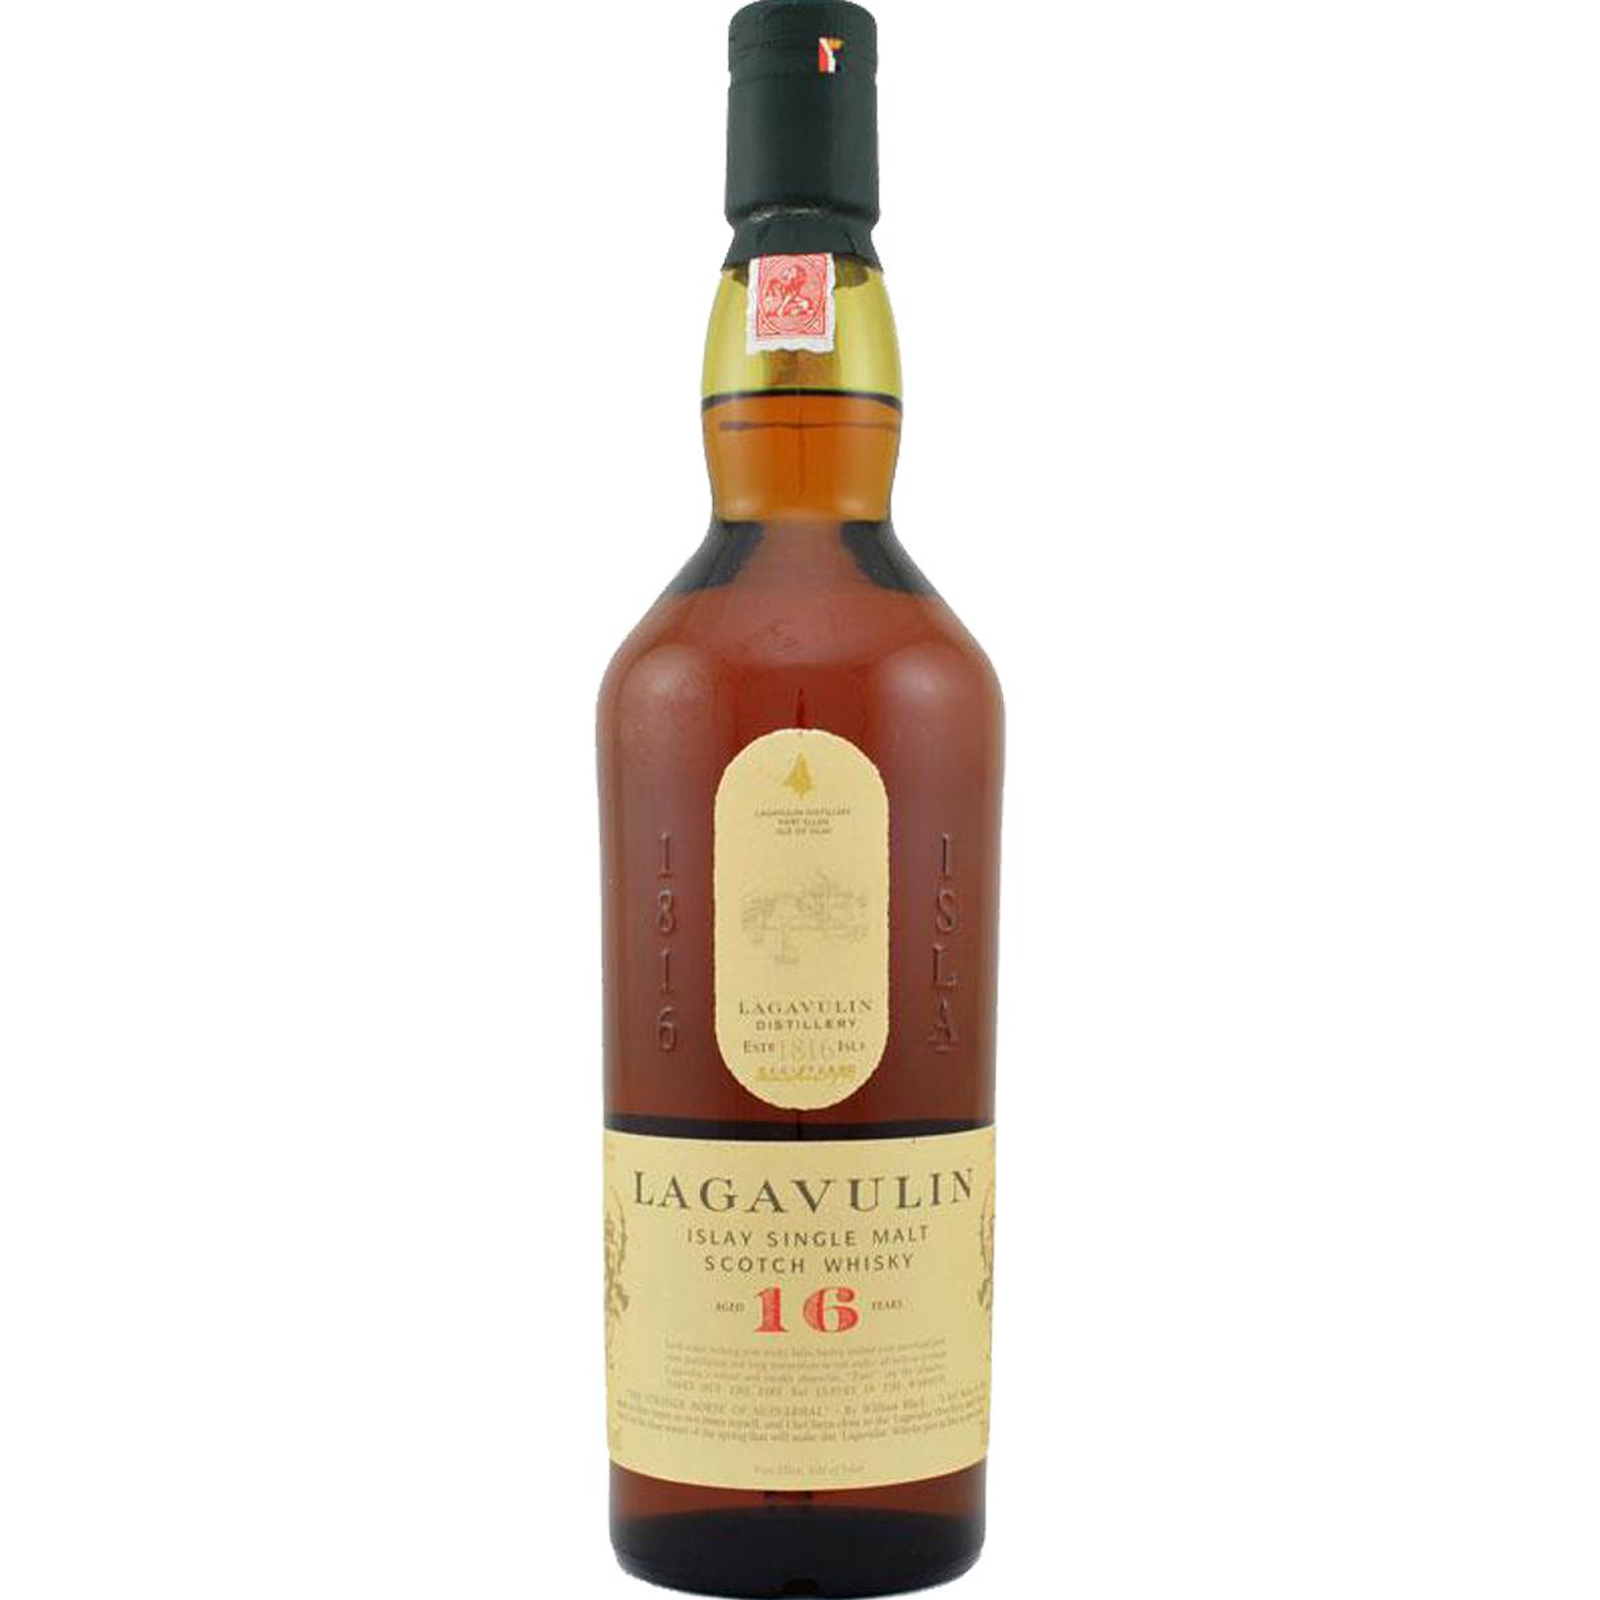 You are currently viewing Lagavulin 16 years